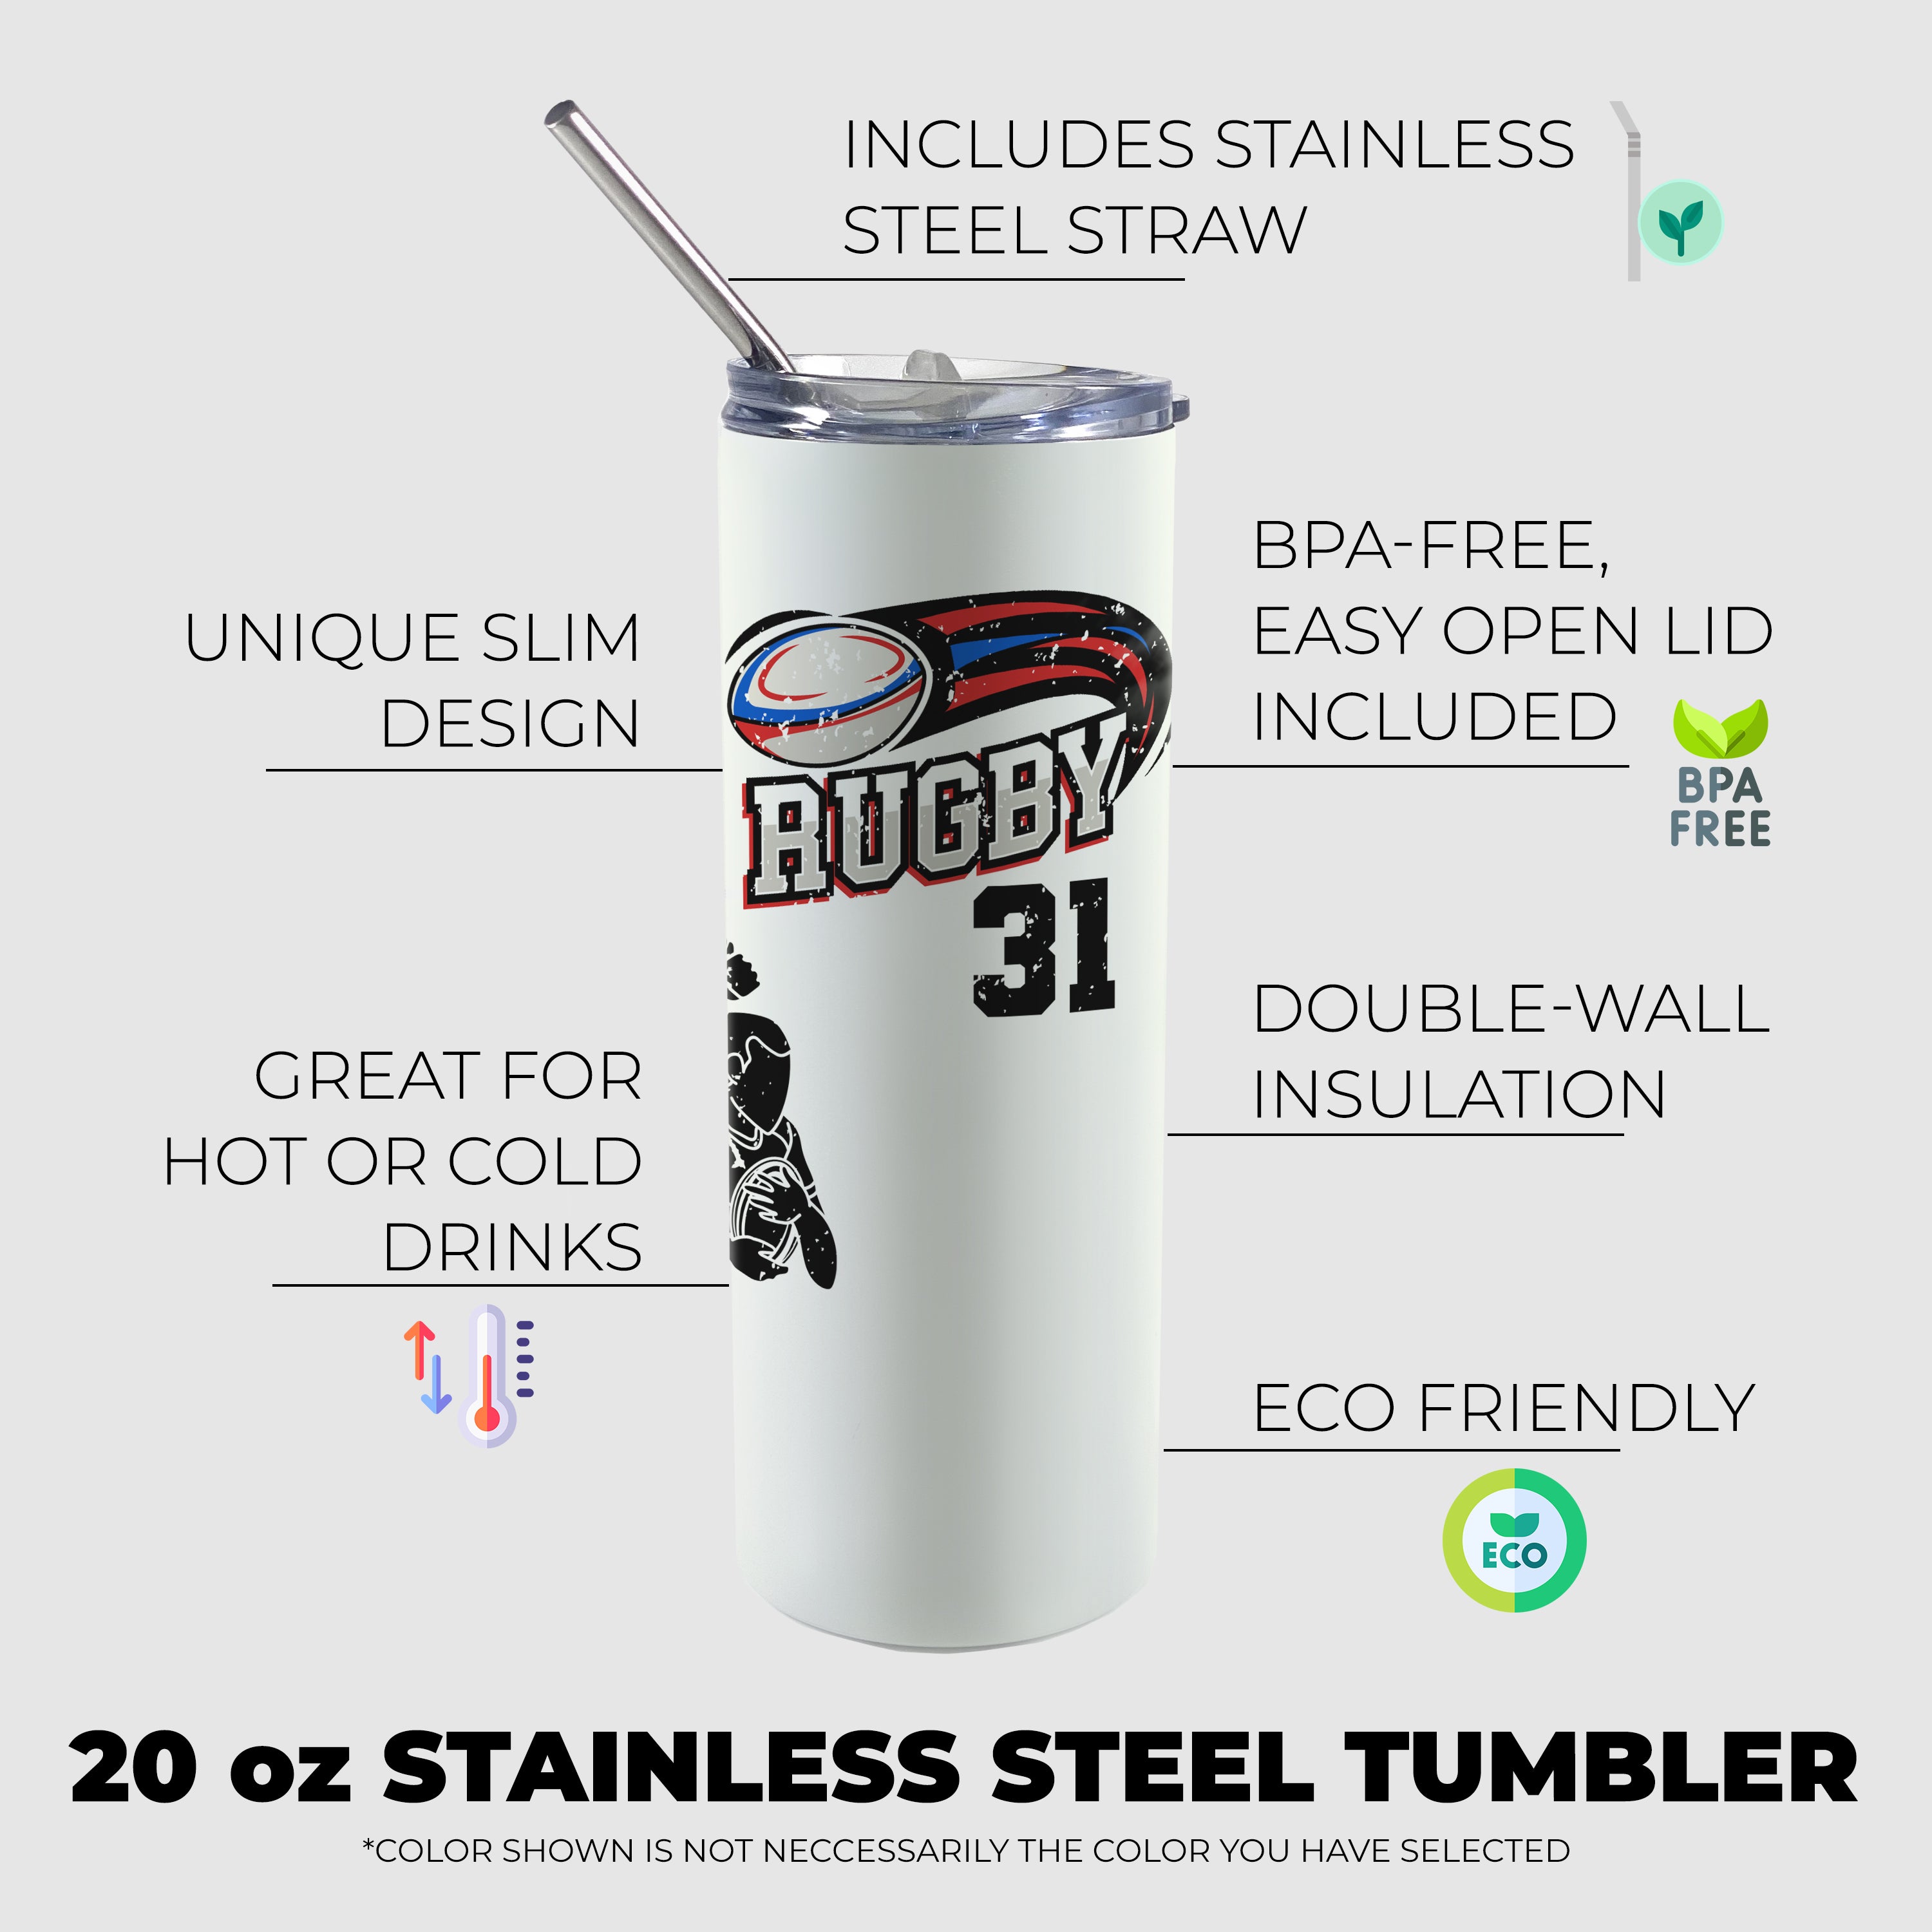 Sports Collection (Rugby Number - Personalized) 20oz Stainless Steel Tumbler with Straw